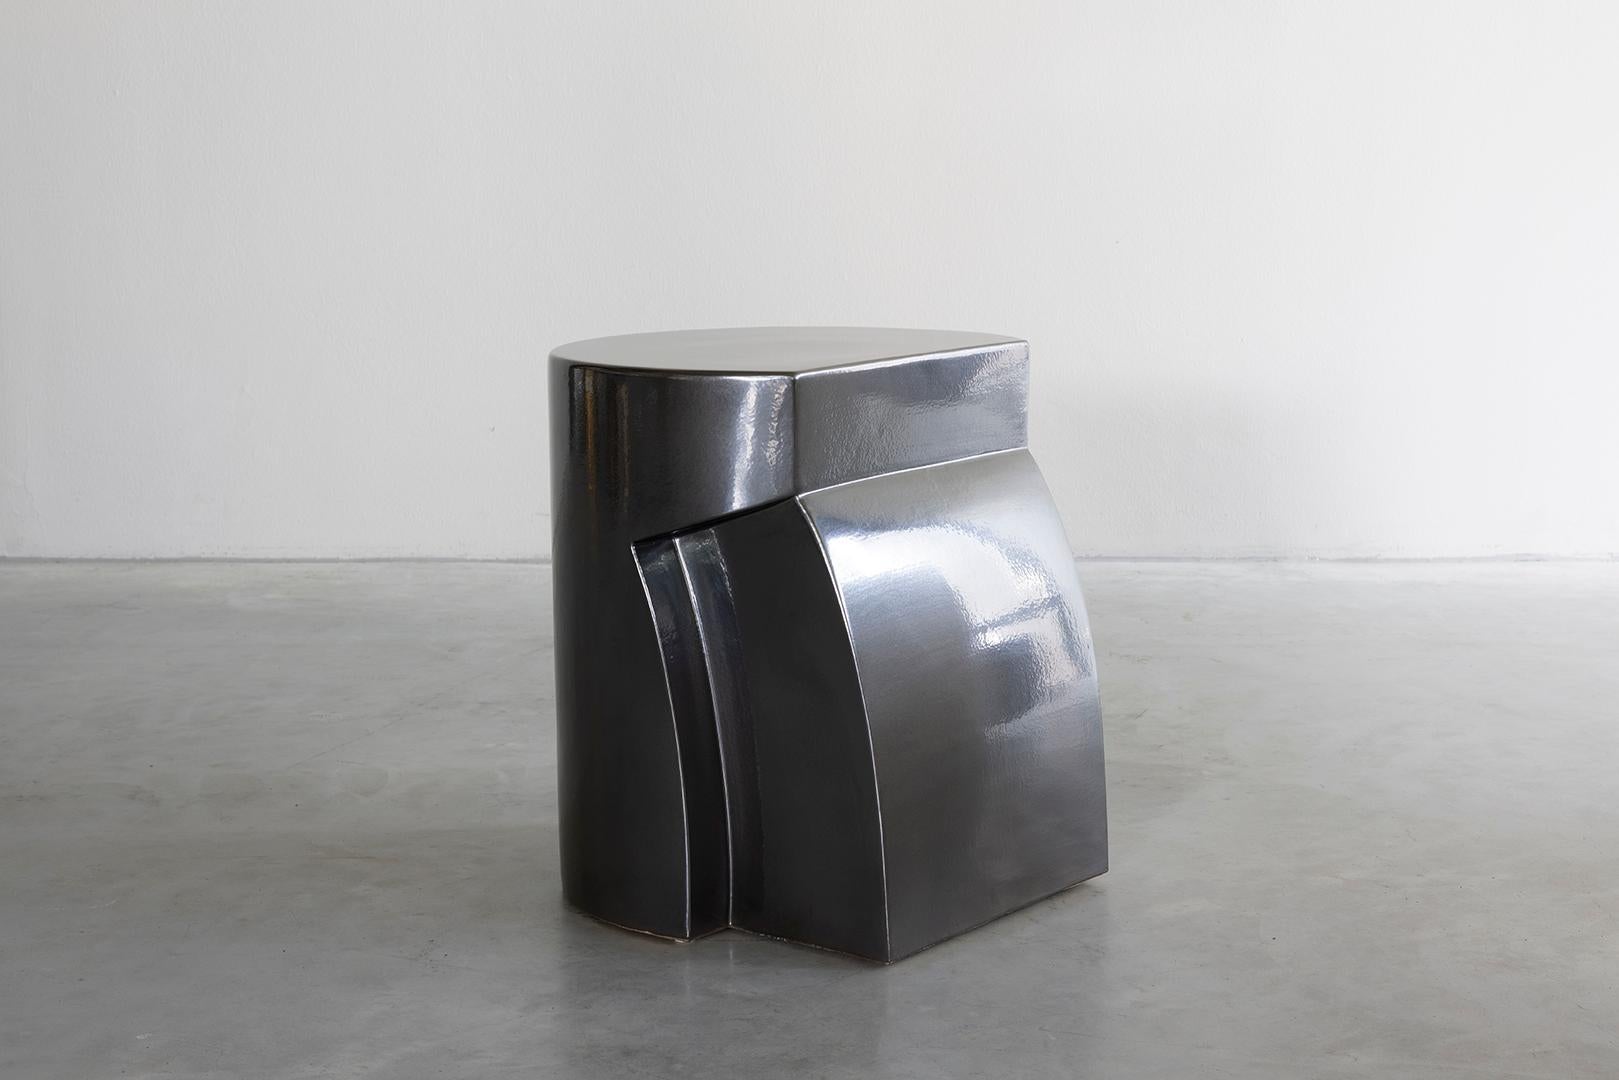 Zig Object by Van Rossum
Dimensions: L 41 x W 40 x H 45 cm
Materials: Ceramic

For over 40 years, Van Rossum has designed and handmade solid and sustainable furniture from the workshop in Bergharen, the Netherlands. Exquisite craftsmanship,